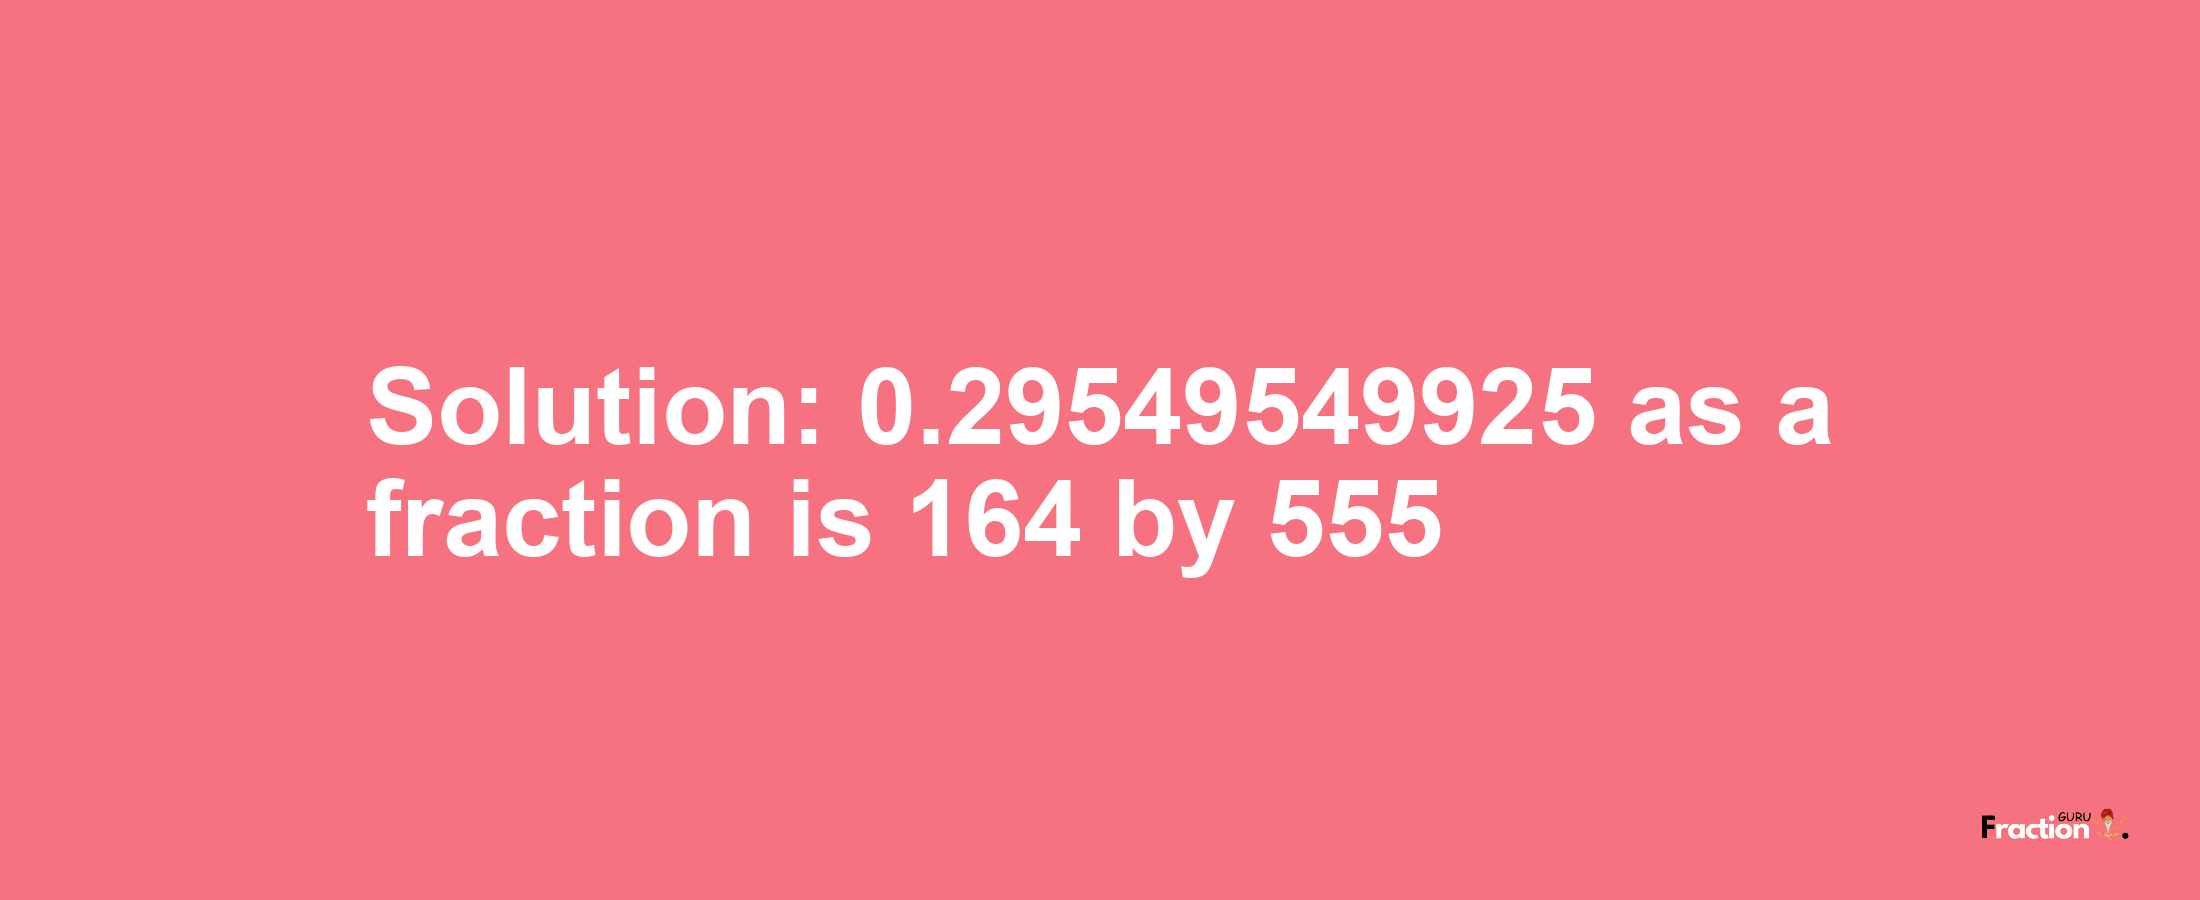 Solution:0.29549549925 as a fraction is 164/555